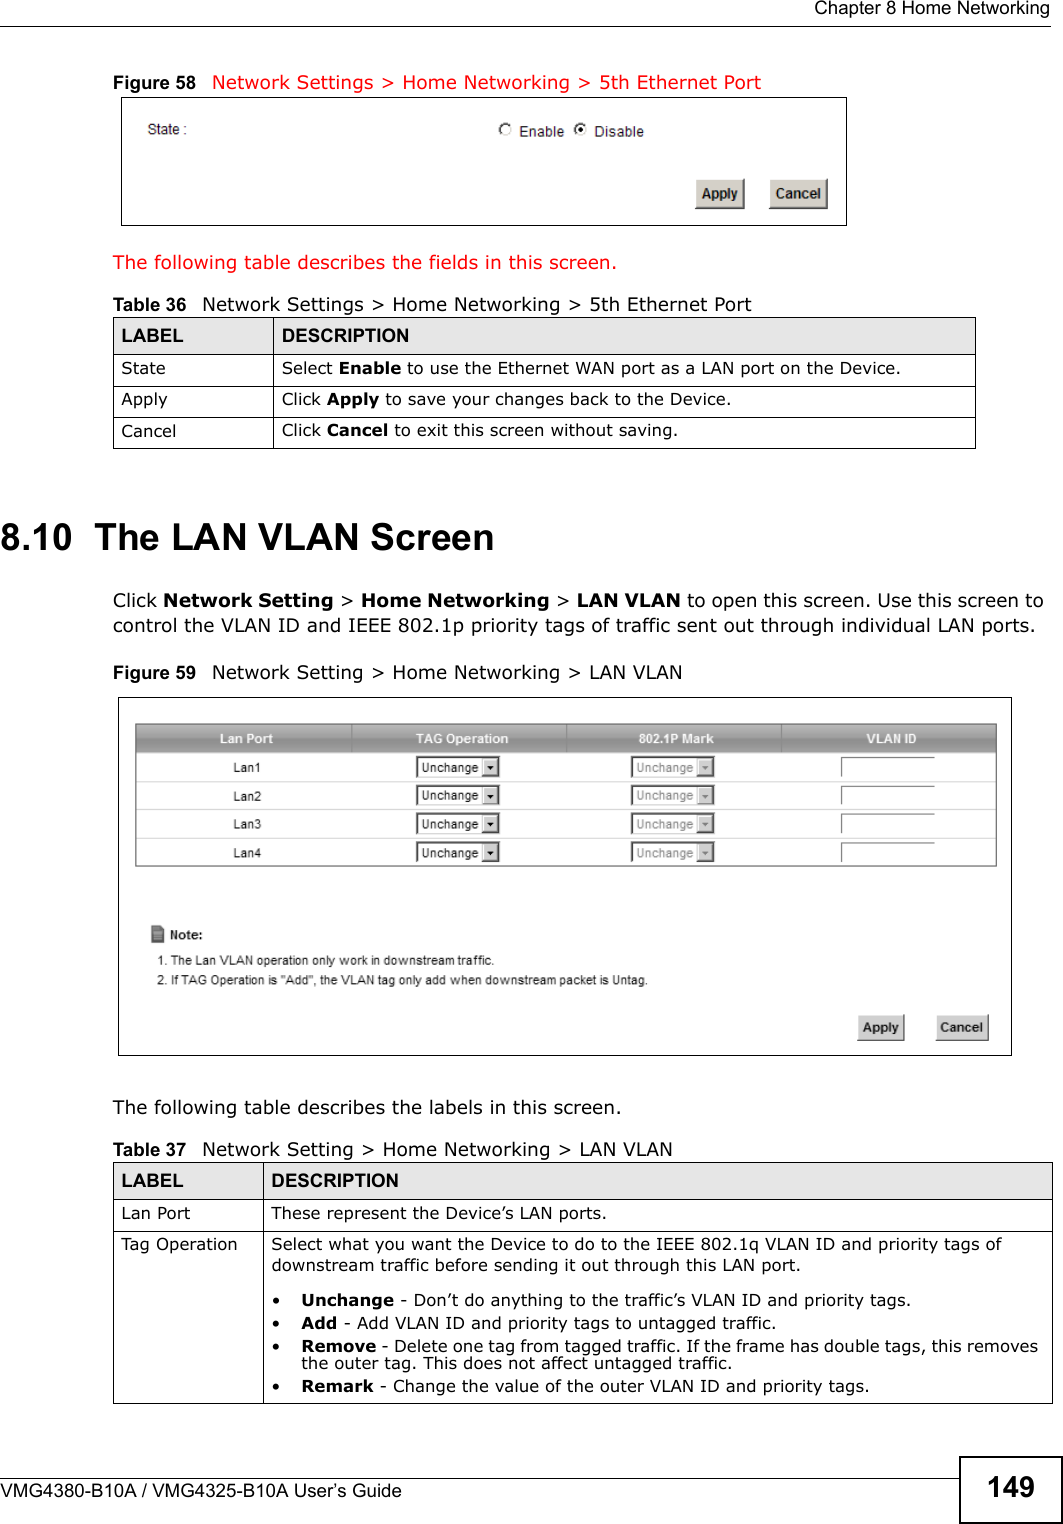 Chapter 8 Home NetworkingVMG4380-B10A / VMG4325-B10A User’s Guide 149Figure 58 Network Settings &gt; Home Networking &gt; 5th Ethernet PortThe following table describes the fields in this screen.  8.10  The LAN VLAN ScreenClick Network Setting &gt; Home Networking &gt; LAN VLAN to open this screen. Use this screen to control the VLAN ID and IEEE 802.1p priority tags of traffic sent out through individual LAN ports. Figure 59   Network Setting &gt; Home Networking &gt; LAN VLANThe following table describes the labels in this screen.Table 36   Network Settings &gt; Home Networking &gt; 5th Ethernet PortLABEL DESCRIPTIONState Select Enable to use the Ethernet WAN port as a LAN port on the Device.Apply Click Apply to save your changes back to the Device.Cancel Click Cancel to exit this screen without saving.Table 37   Network Setting &gt; Home Networking &gt; LAN VLANLABEL DESCRIPTIONLan Port These represent the Device’s LAN ports.Tag Operation Select what you want the Device to do to the IEEE 802.1q VLAN ID and priority tags ofdownstream traffic before sending it out through this LAN port.•Unchange - Don’t do anything to the traffic’s VLAN ID and priority tags.•Add - Add VLAN ID and priority tags to untagged traffic.•Remove - Delete one tag from tagged traffic. If the frame has double tags, this removes the outer tag. This does not affect untagged traffic.•Remark - Change the value of the outer VLAN ID and priority tags.